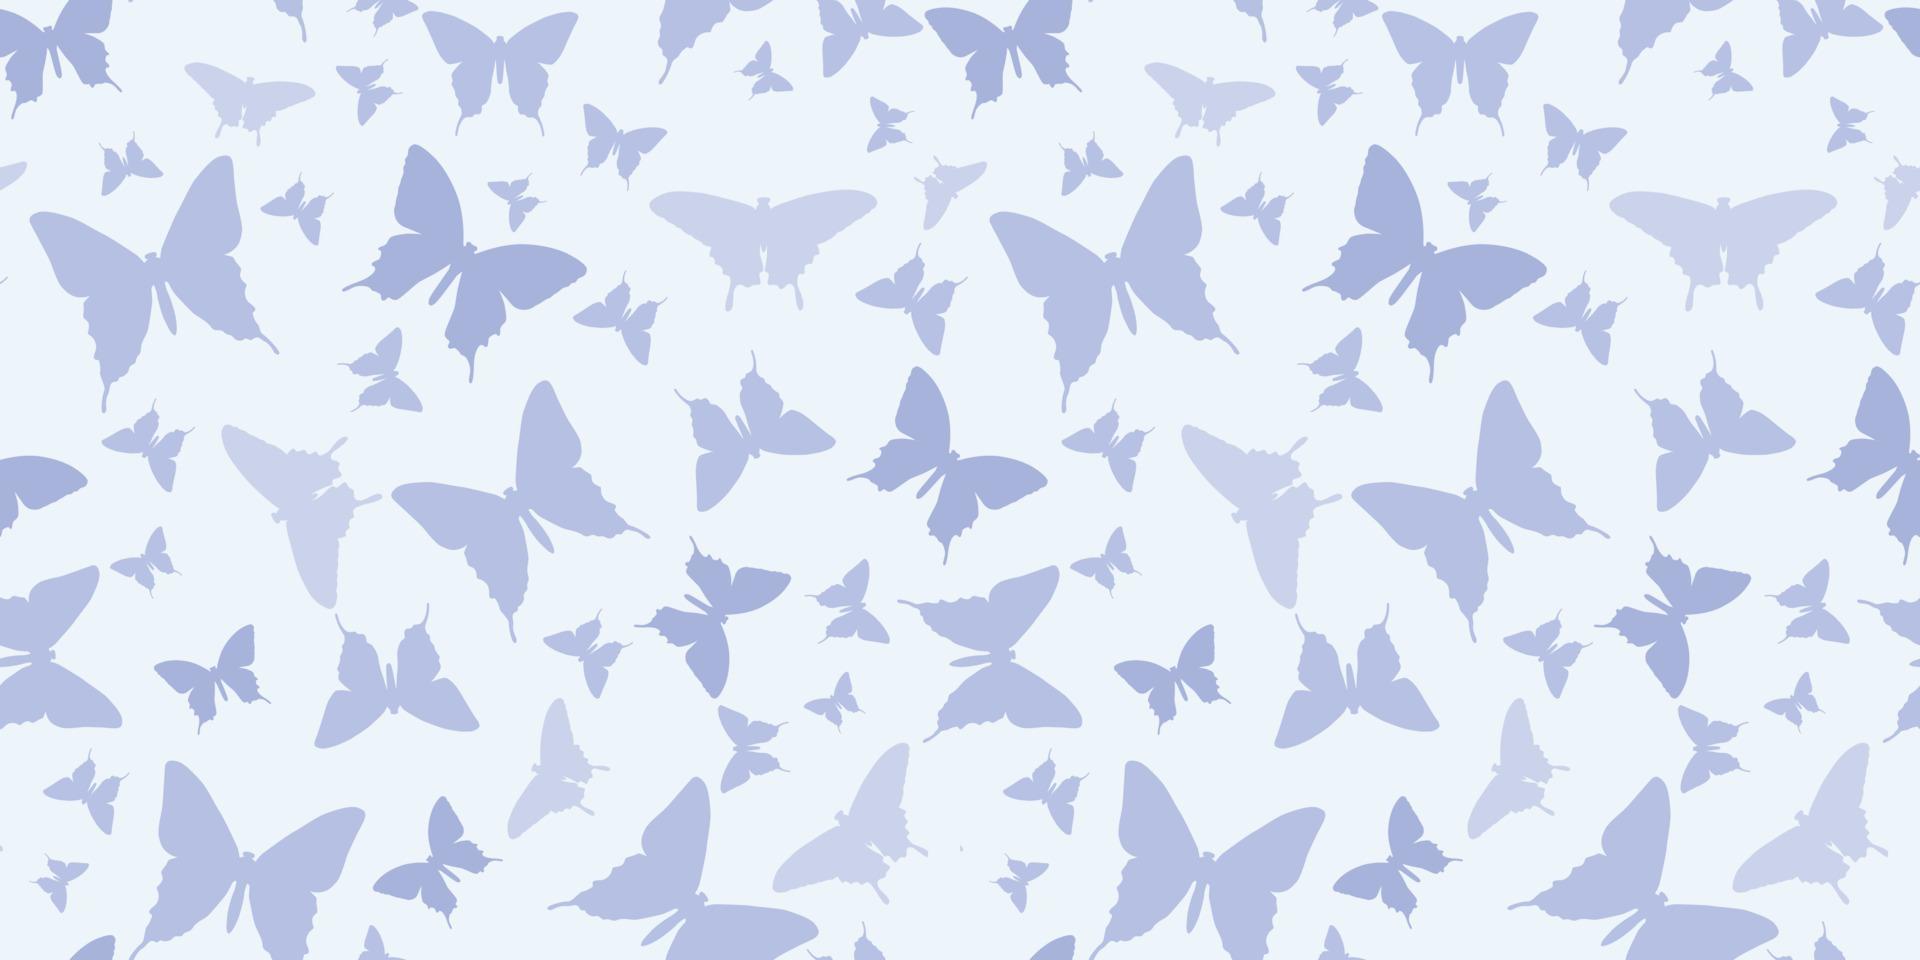 Butterfly silhouette seamless vector pattern background, blue